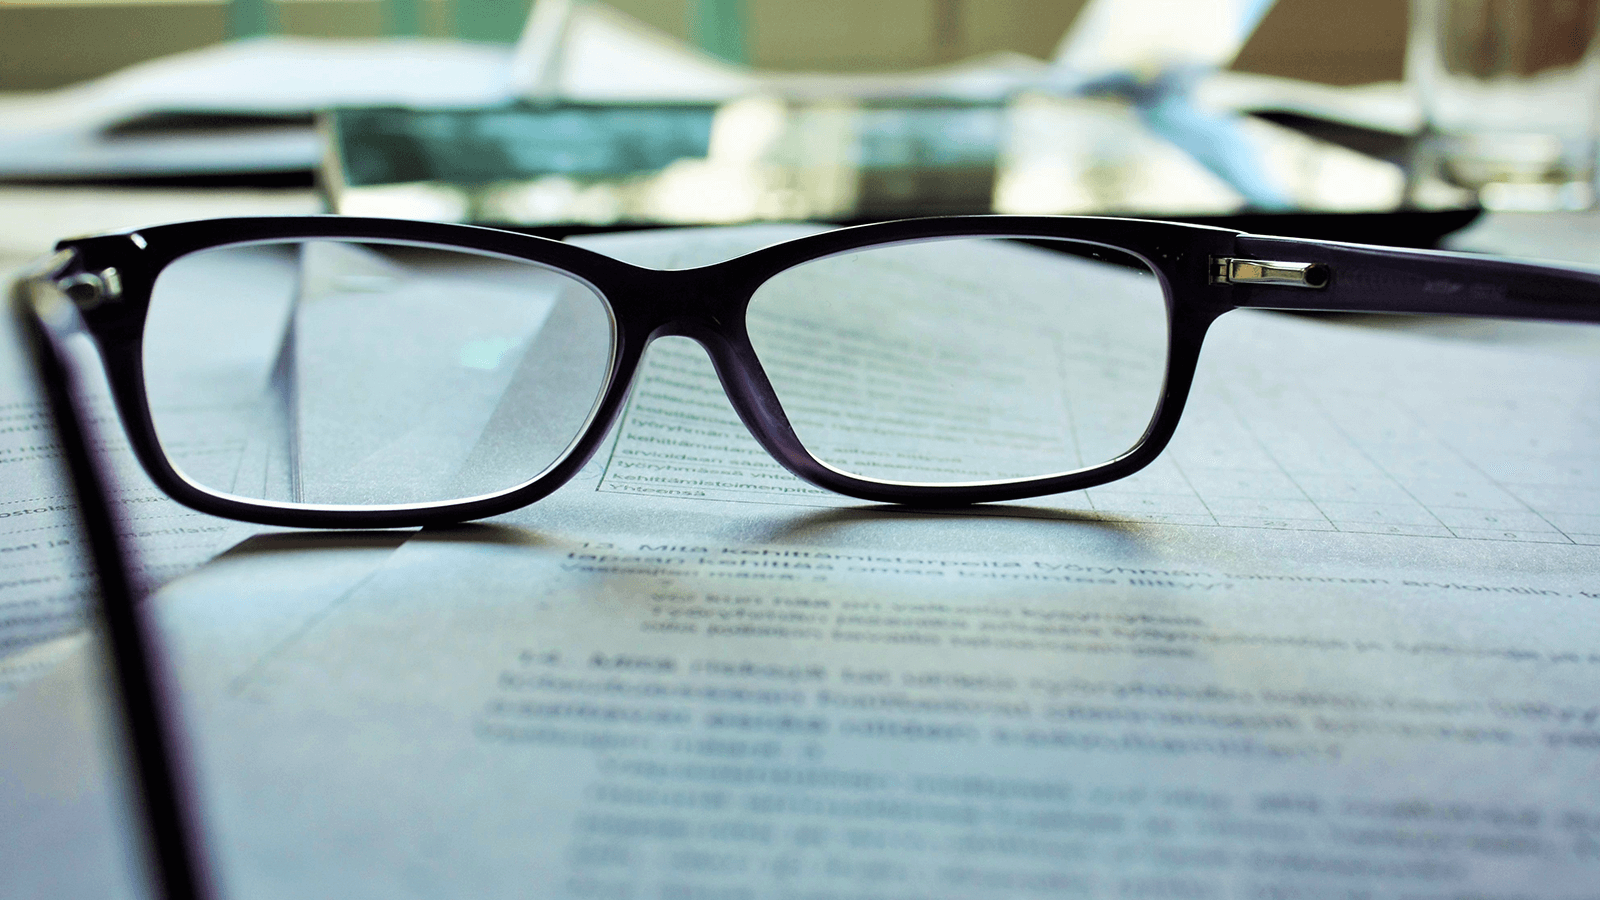 A pair of glasses rests on top of a stack of paperwork